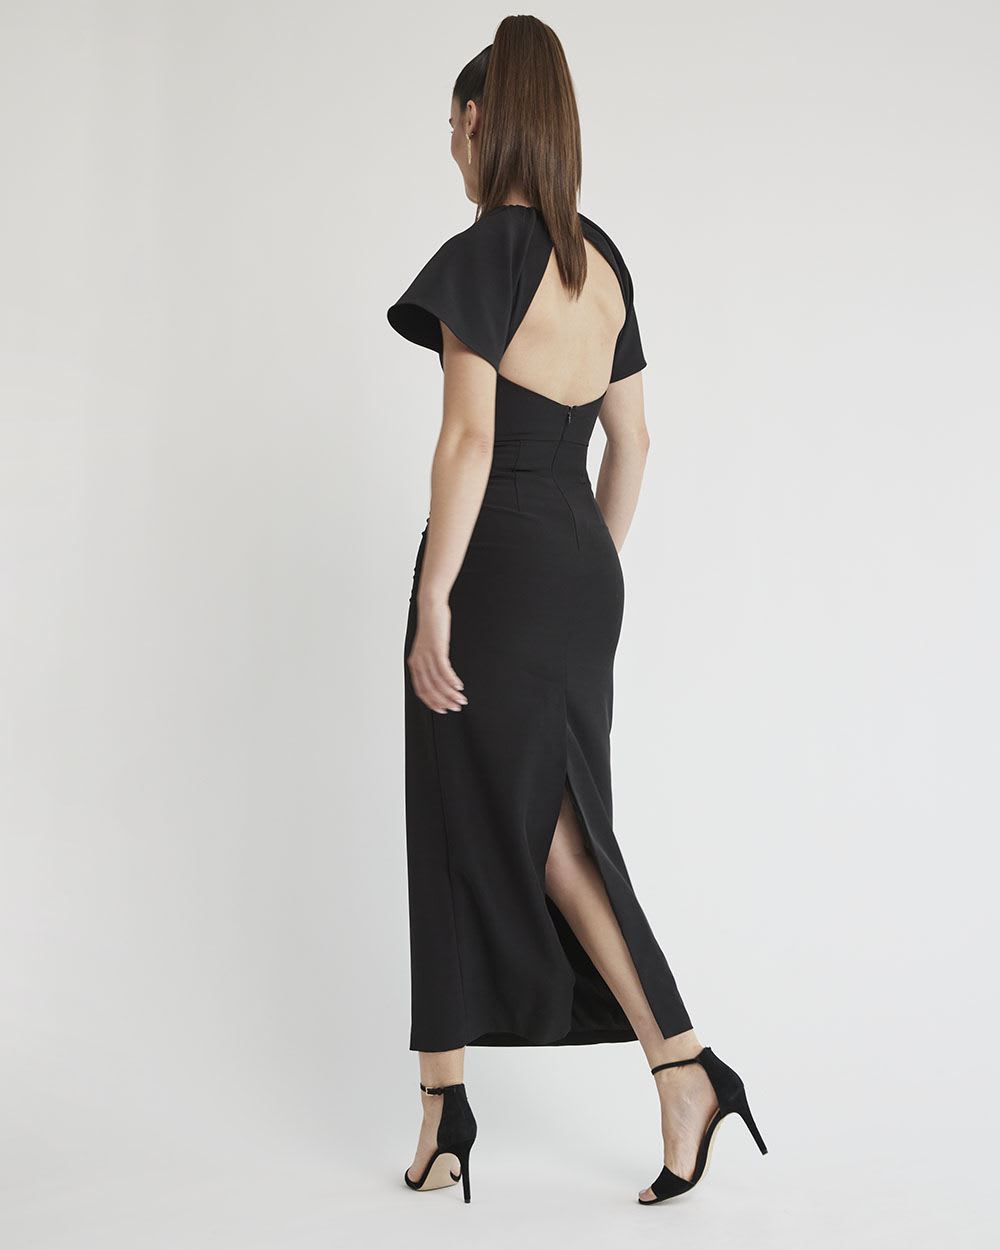 Short-Sleeve Maxi Cocktail Dress with Open Back | RW&CO.